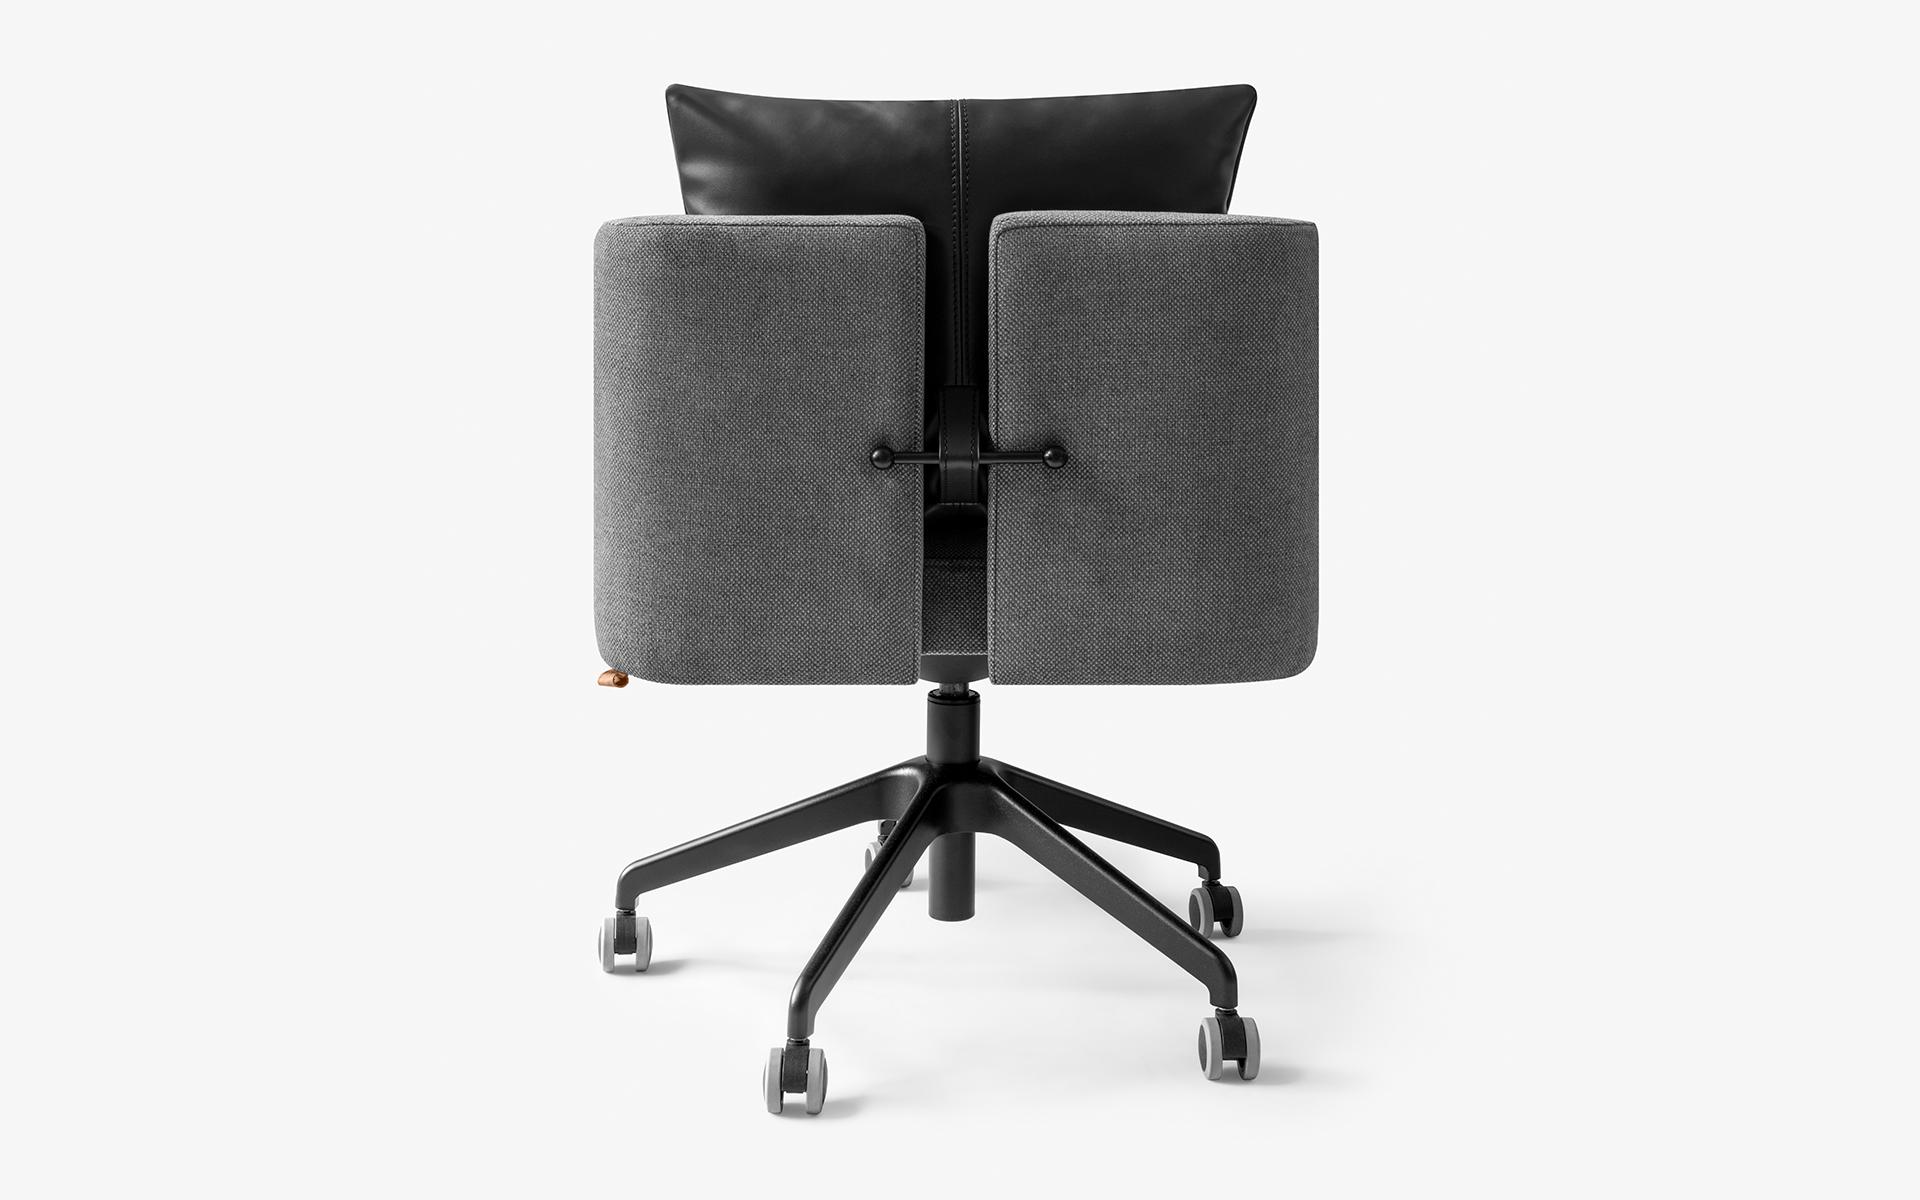 **LEAD TIME 5 WEEKS**

Standing out in every field with its eye-catching modern design approach and material variety, the Papillonne series brings a brand new face to spaces with its minimal appearance. While the Papillonne chair adapts to every